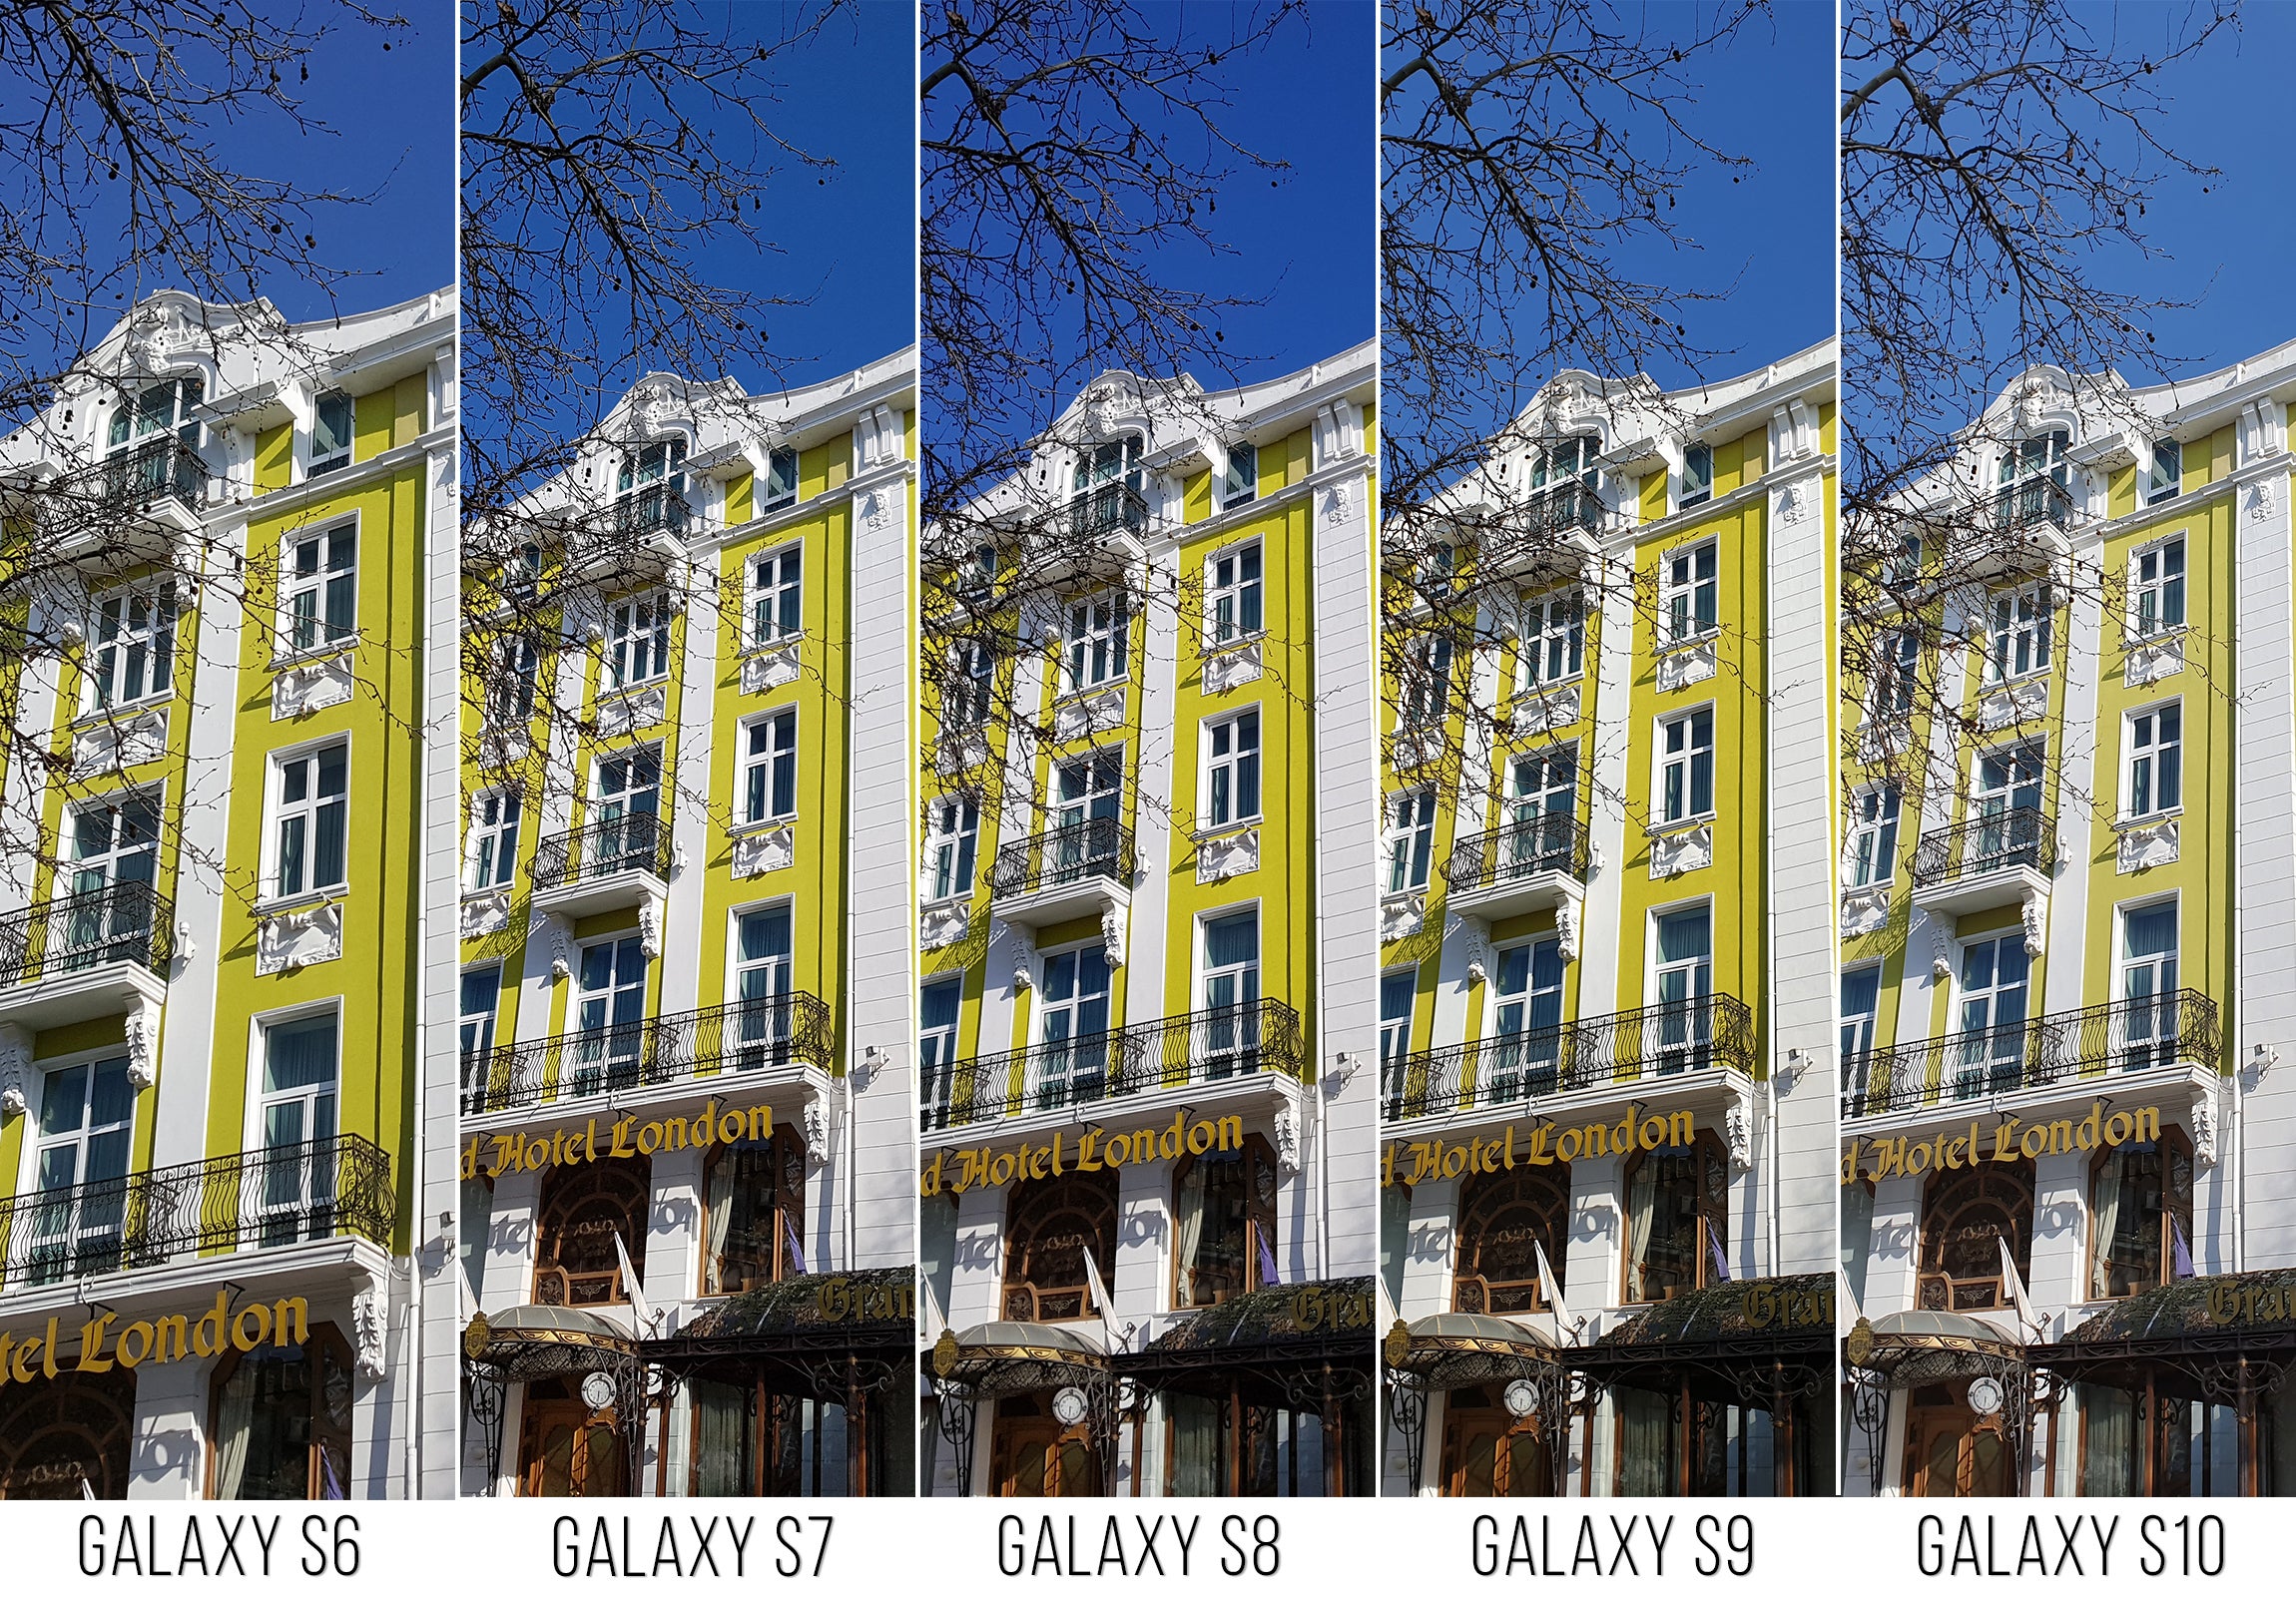 Galaxy S6 to Galaxy S10: Samsung's camera and image quality evolution through the years